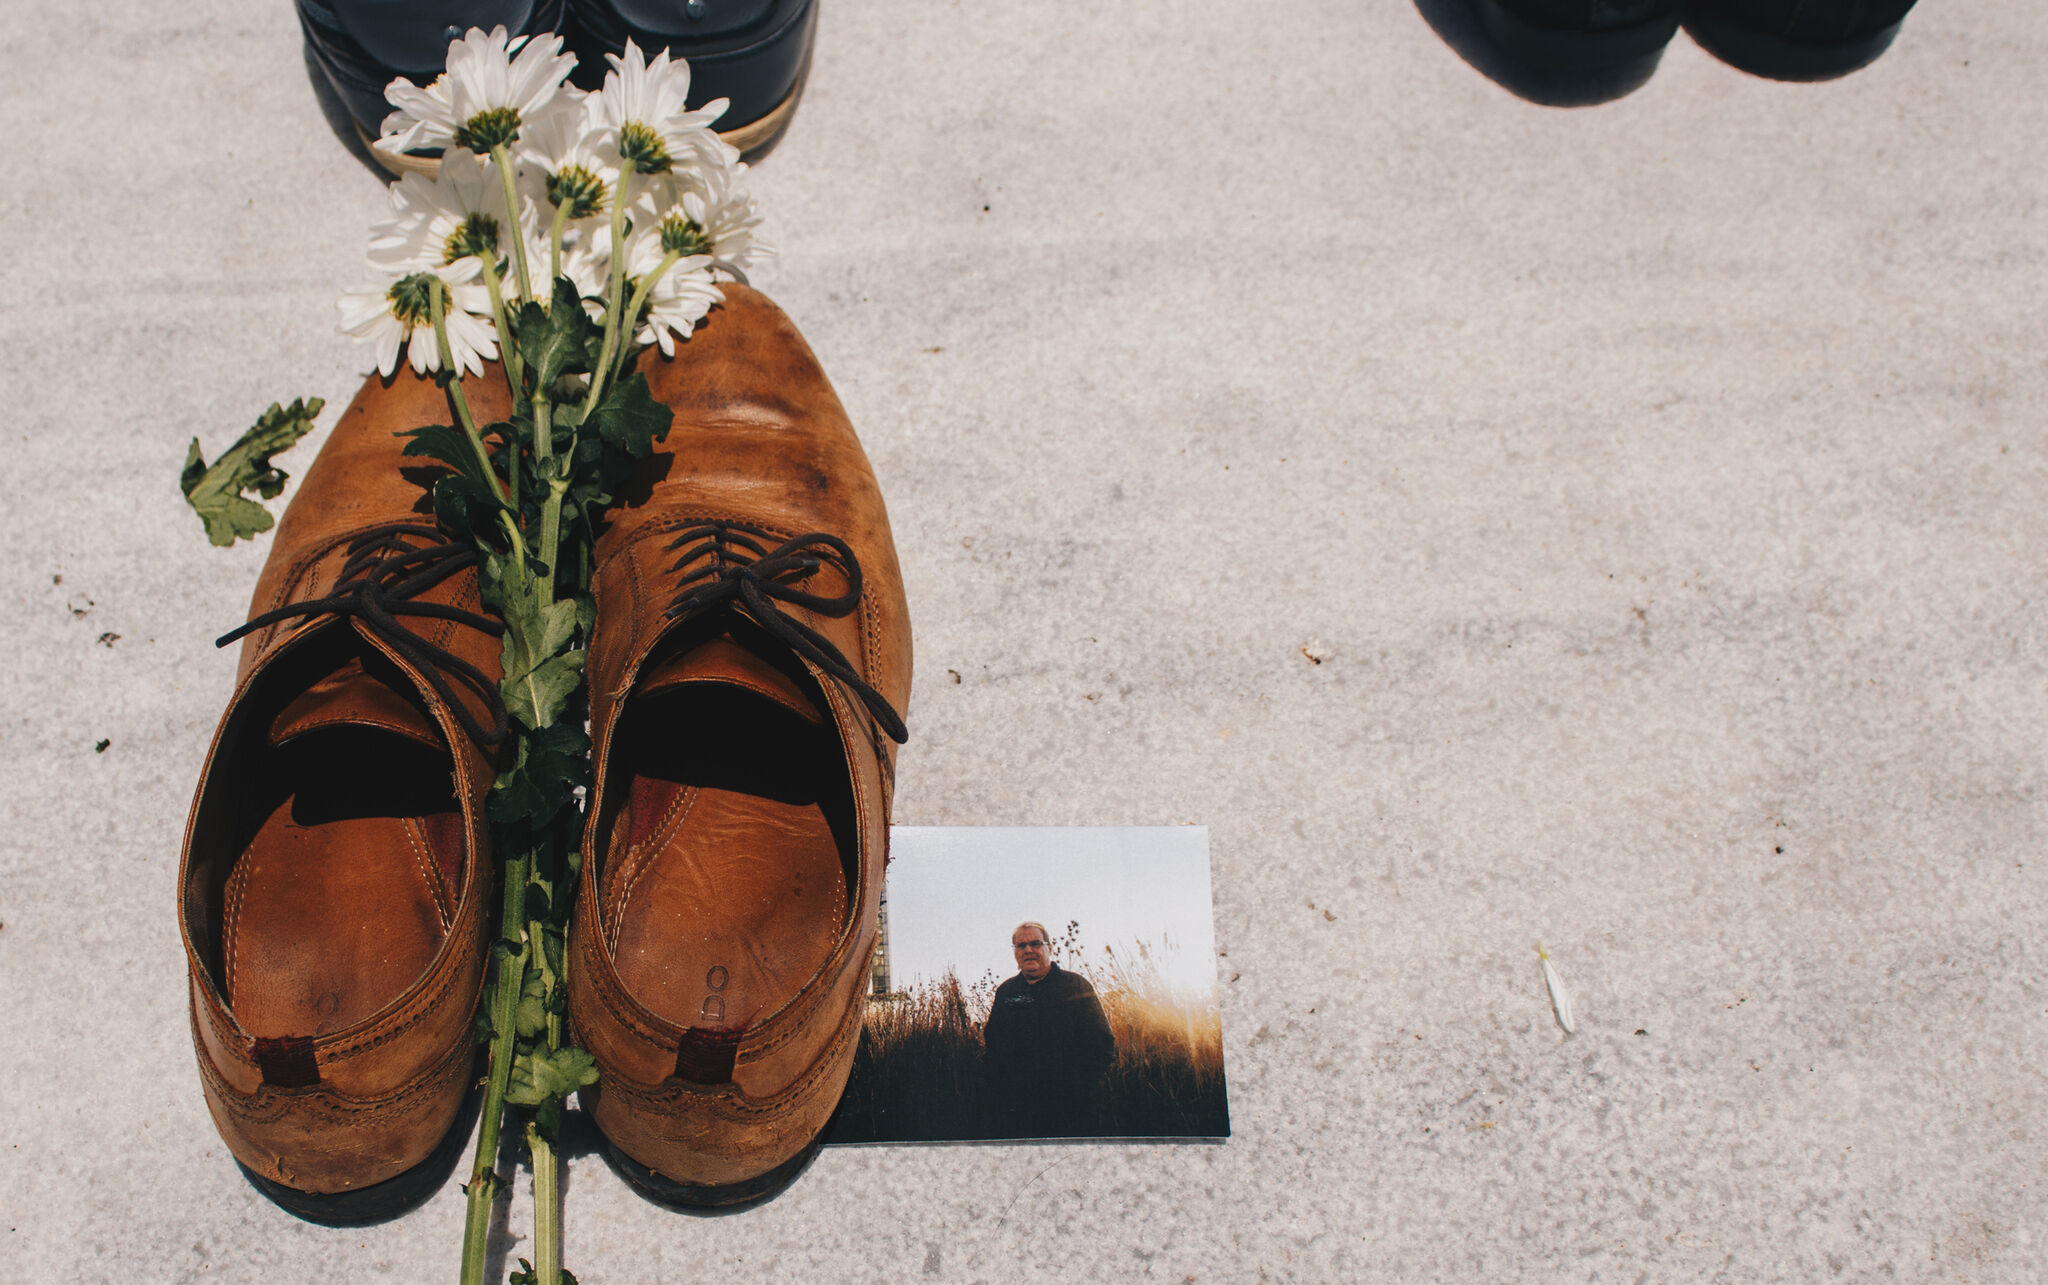 A pair of shoes, flowers, and a photograph of a man.